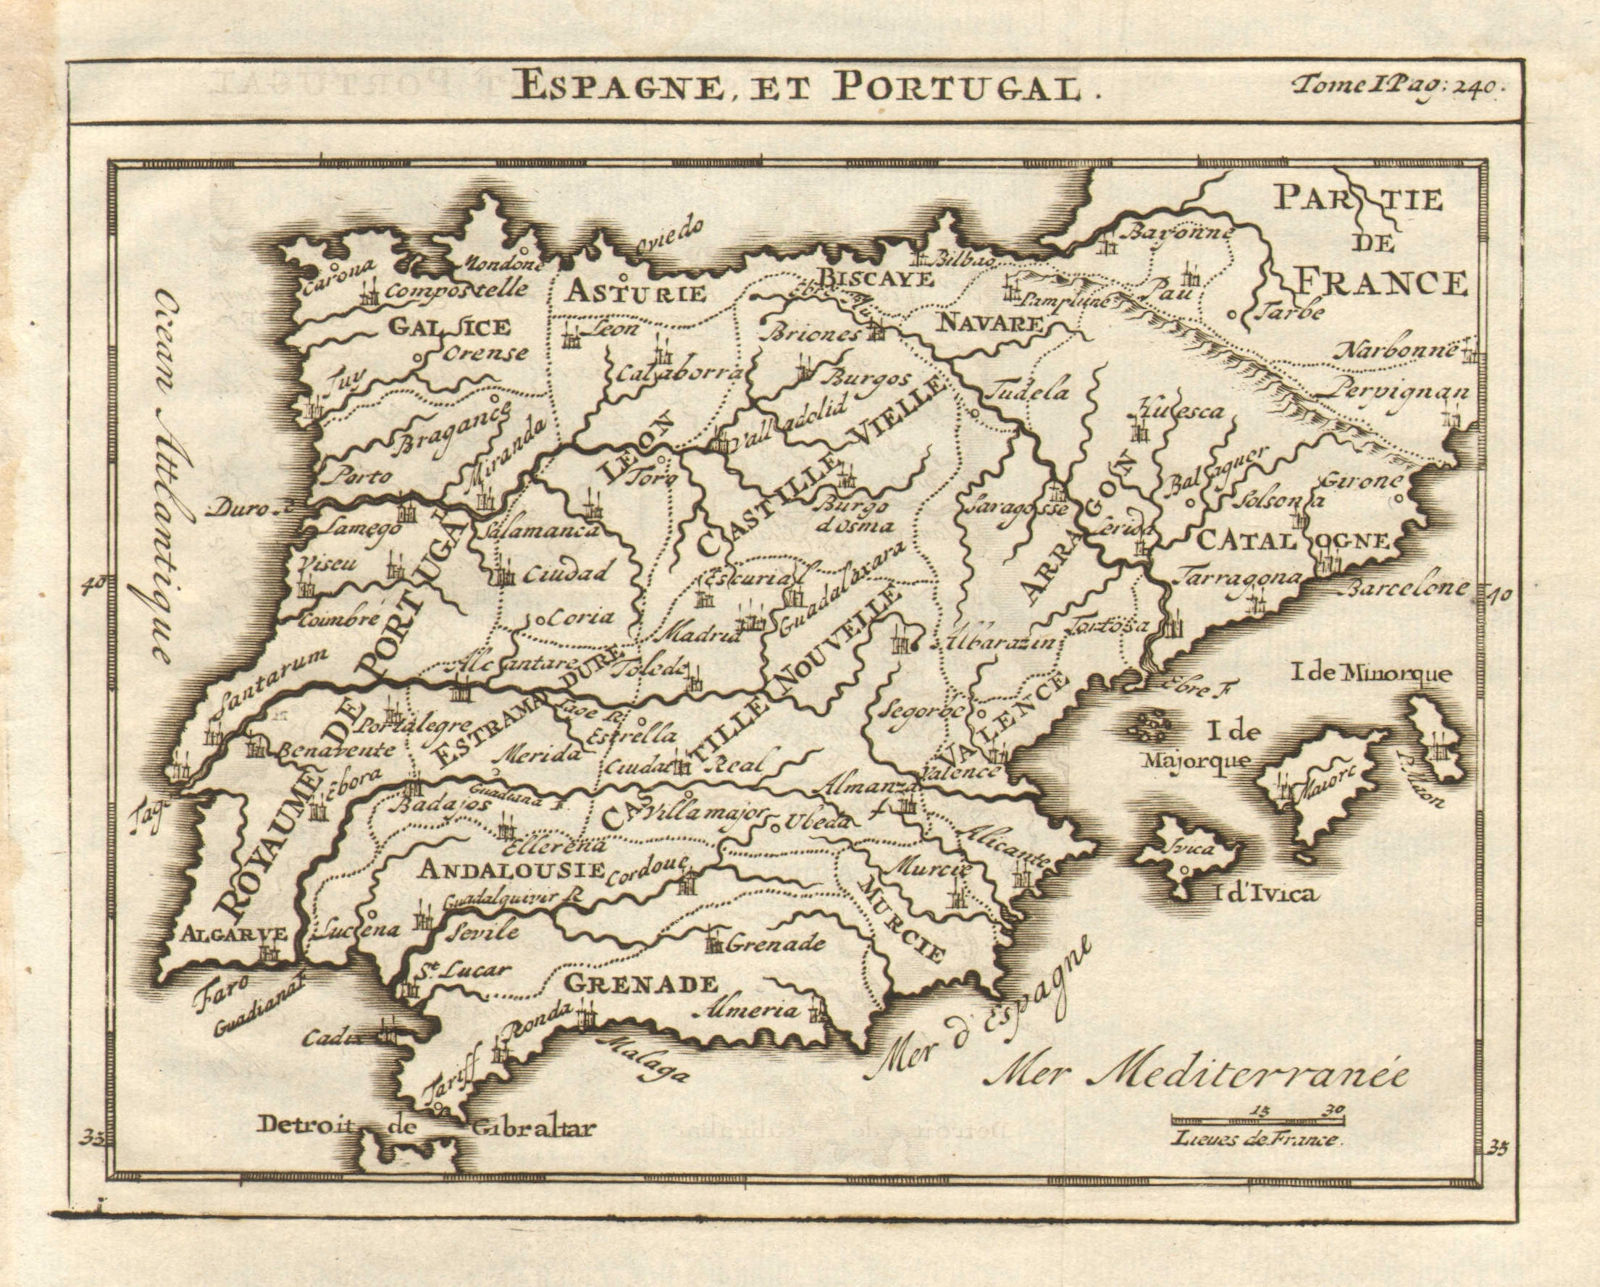 Associate Product 'Espagne et Portugal' by Henry Abraham Chatelain. Iberia Spain 1743 old map